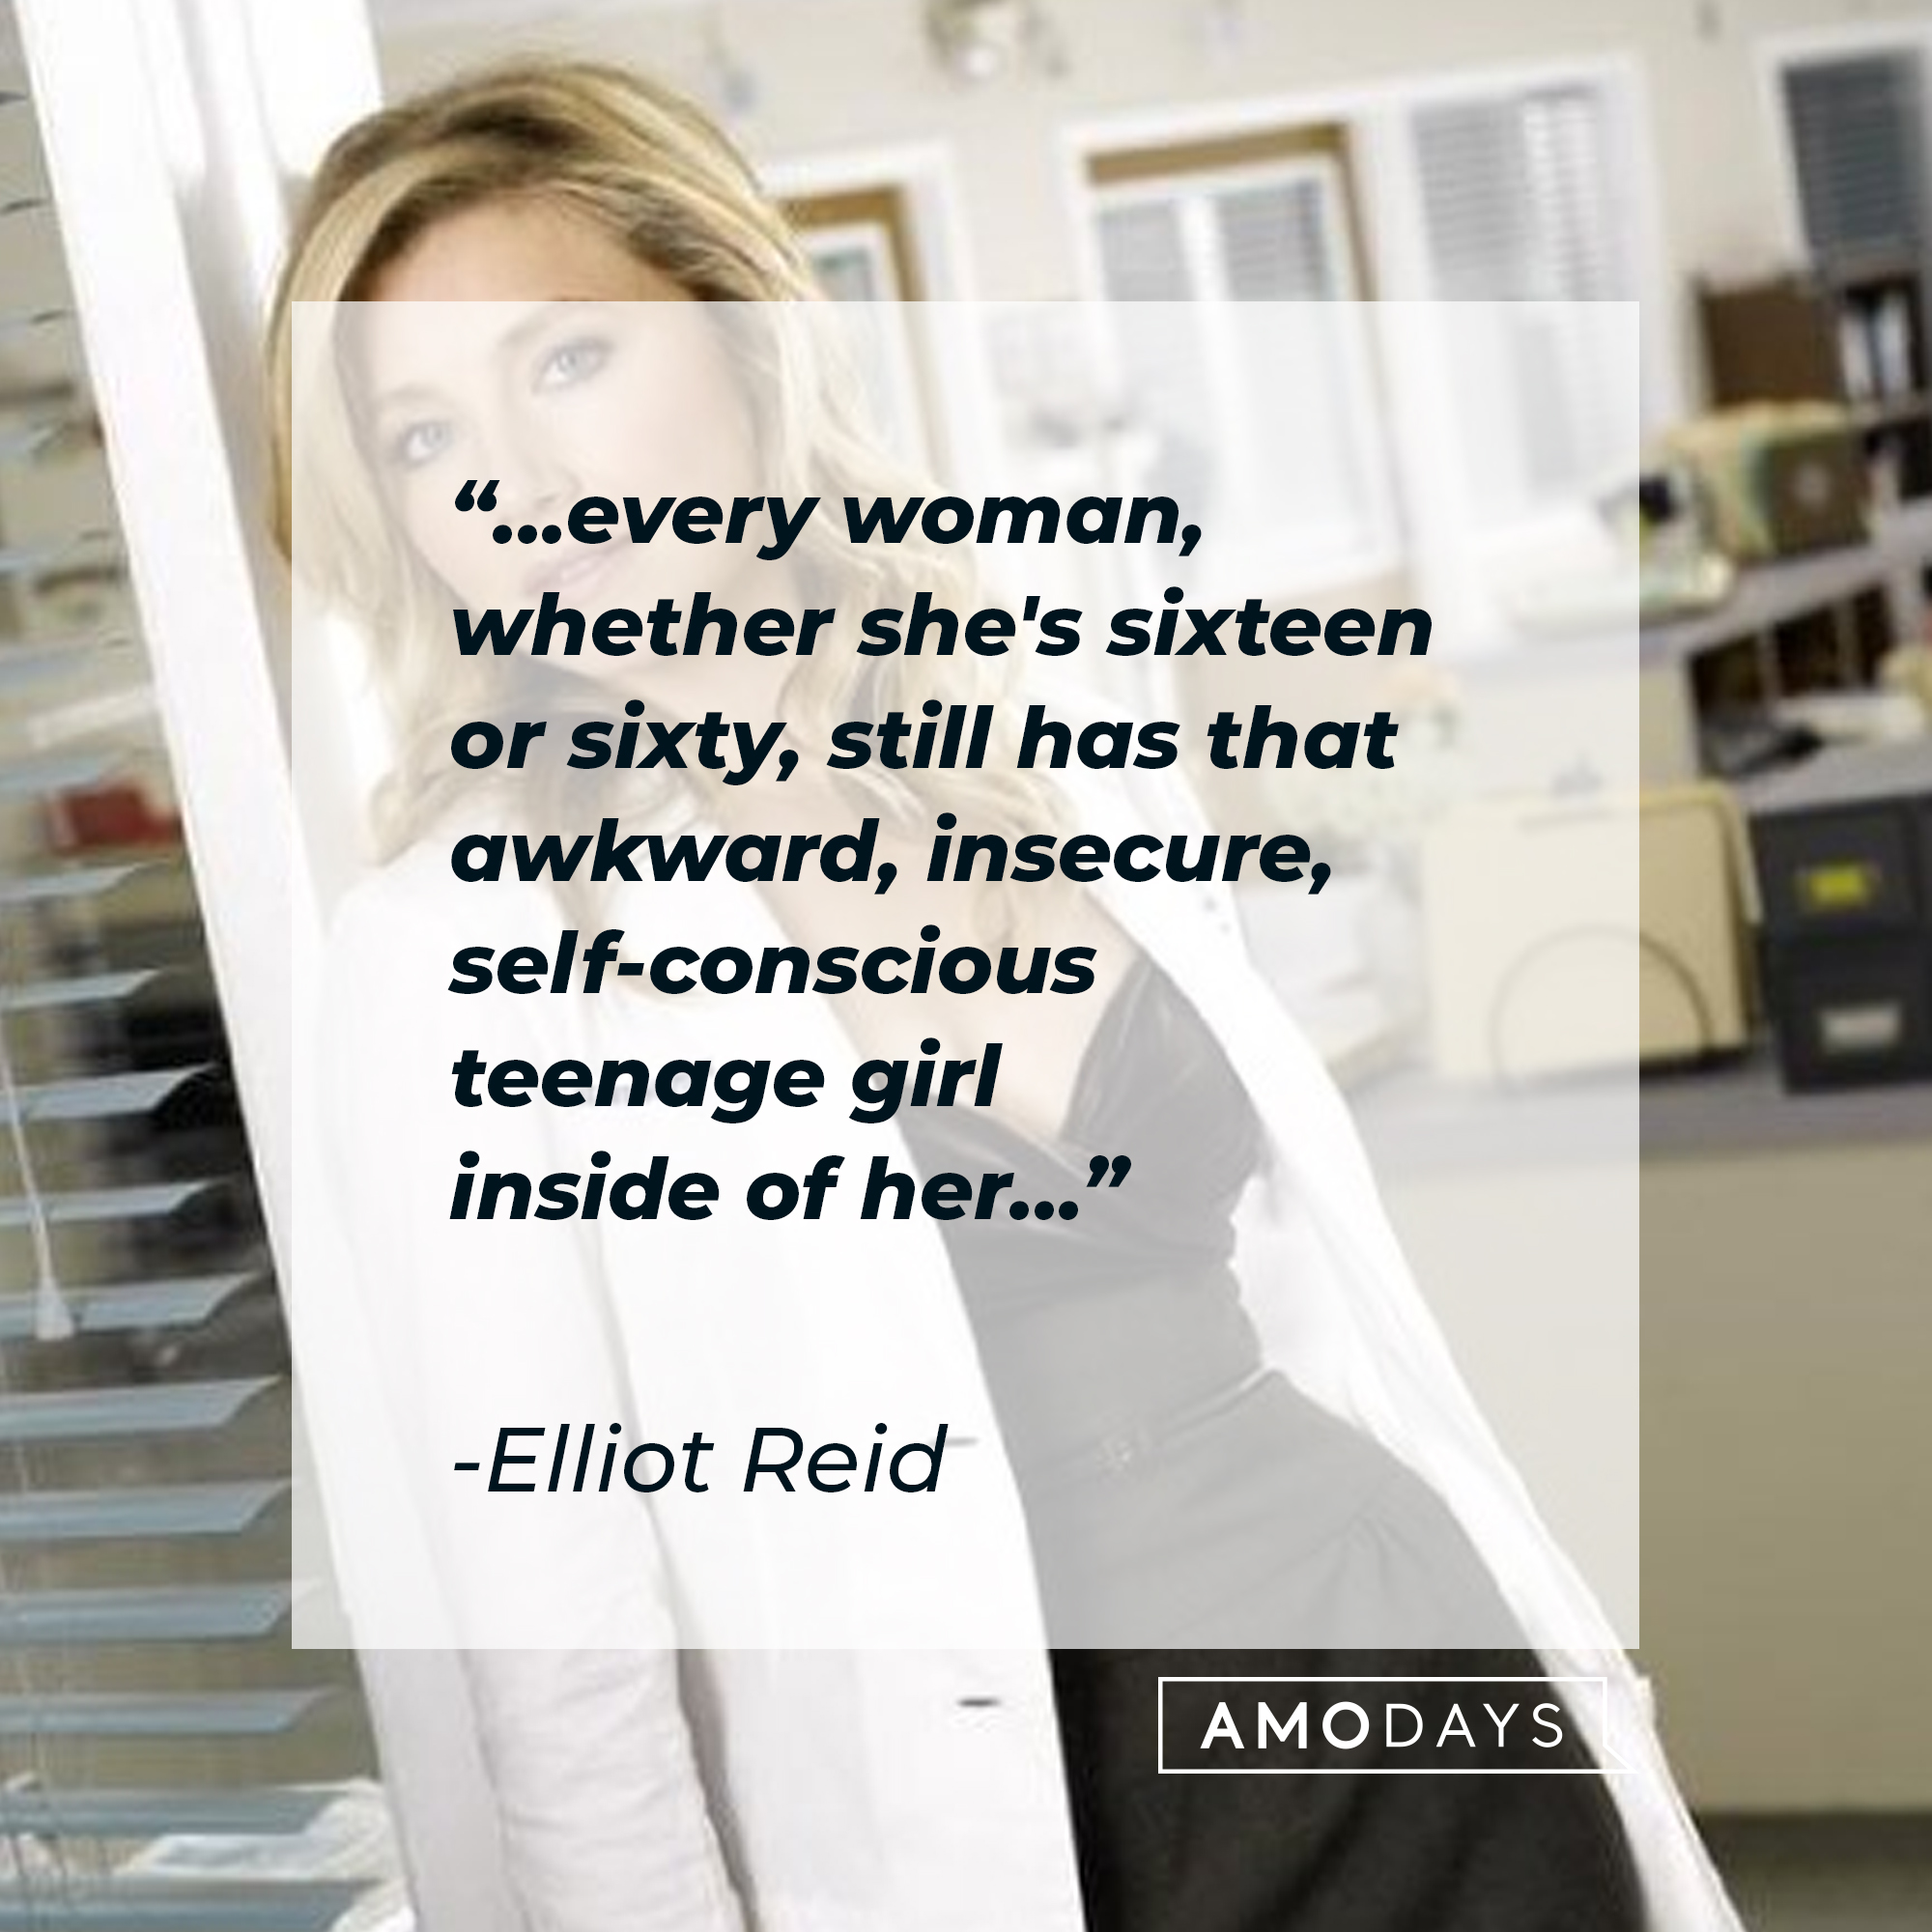 Elliot Reid with her quote: “Every woman, whether she's sixteen or sixty, still has that awkward, insecure, self-conscious teenage girl inside of her…” | Source: Facebook.com/scrubs